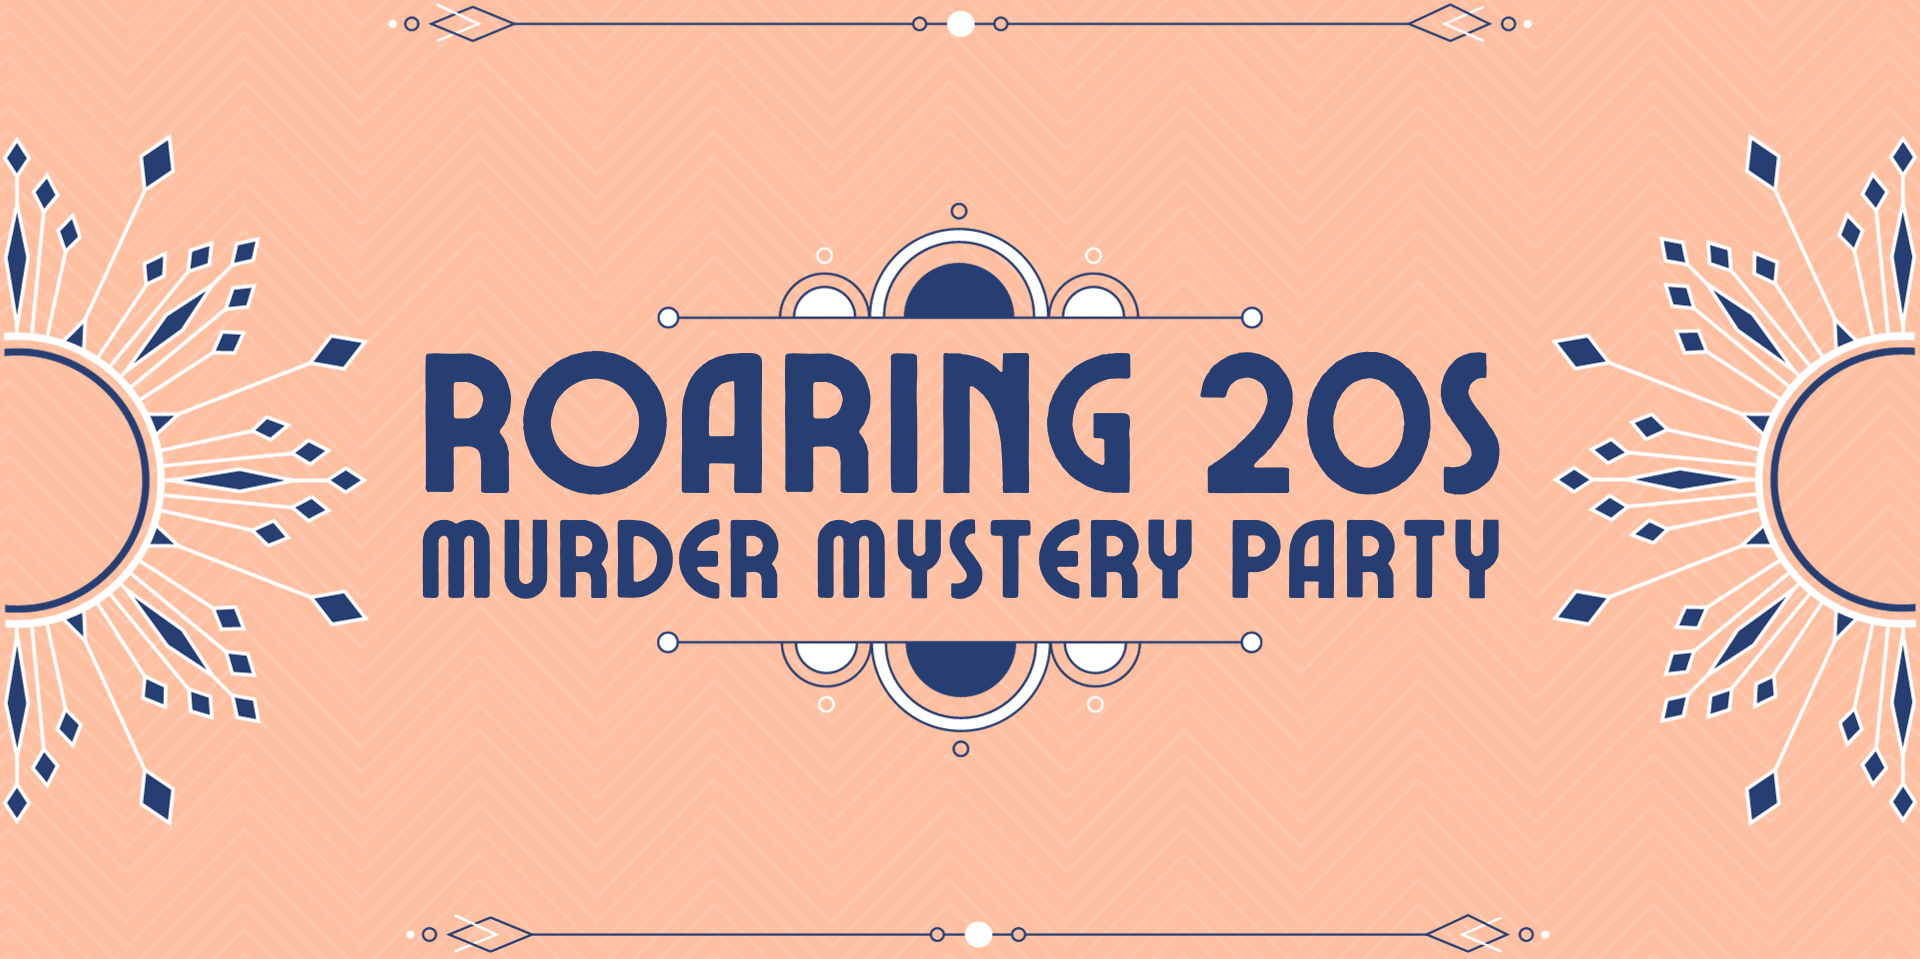 Roaring 20s Murder Mystery Party promotional image